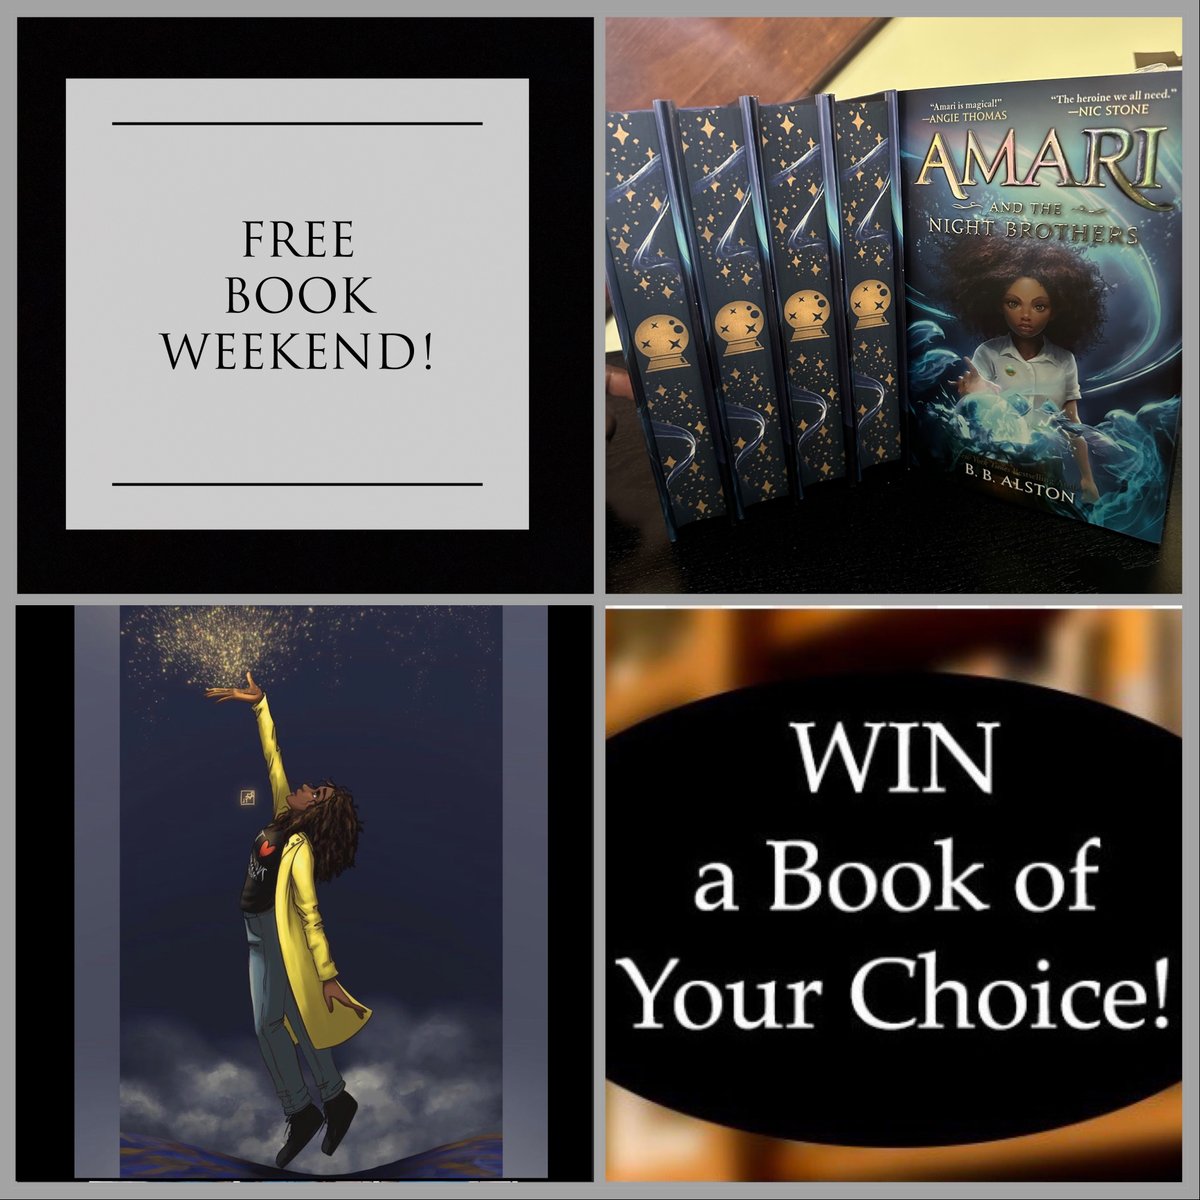 FREE BOOK WEEKEND! just retweet, reply, and follow and I’ll randomly select 5 winners to receive a signed special edition of AMARI AND THE NIGHT BROTHERS, an Amari art card, and an additional book of your choice! Happy Holidays!